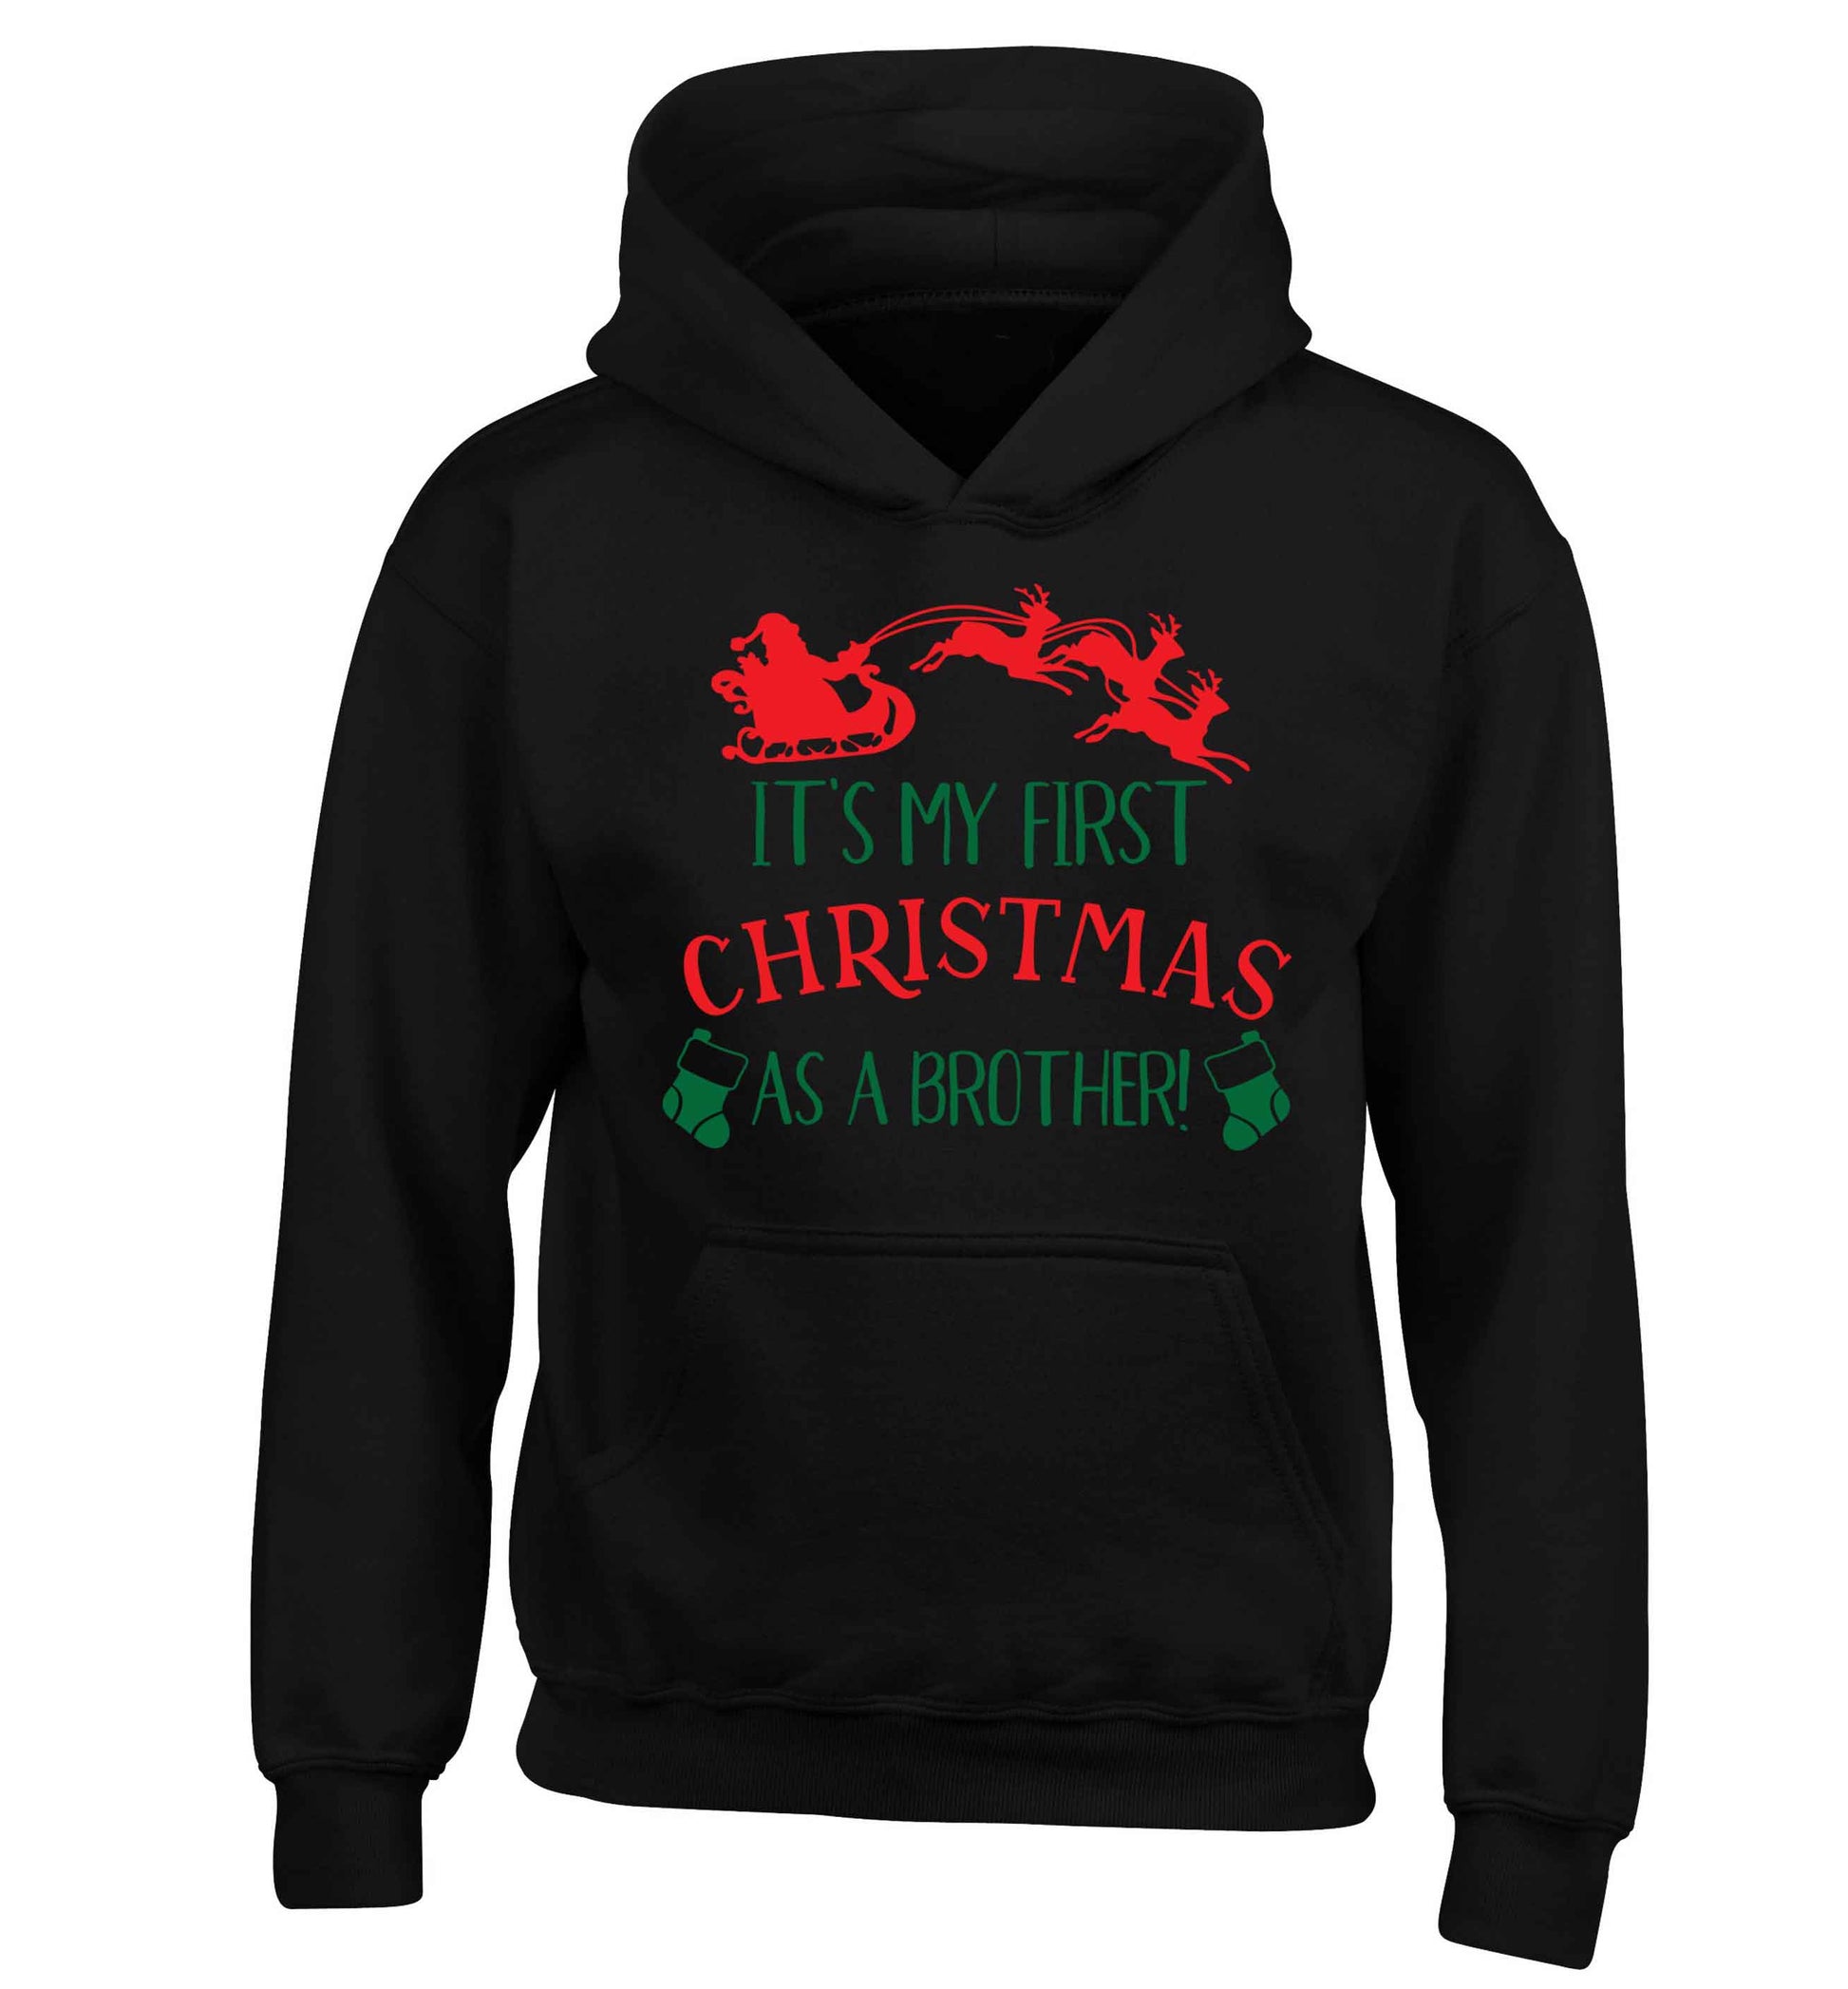 It's my first Christmas as a brother! children's black hoodie 12-13 Years